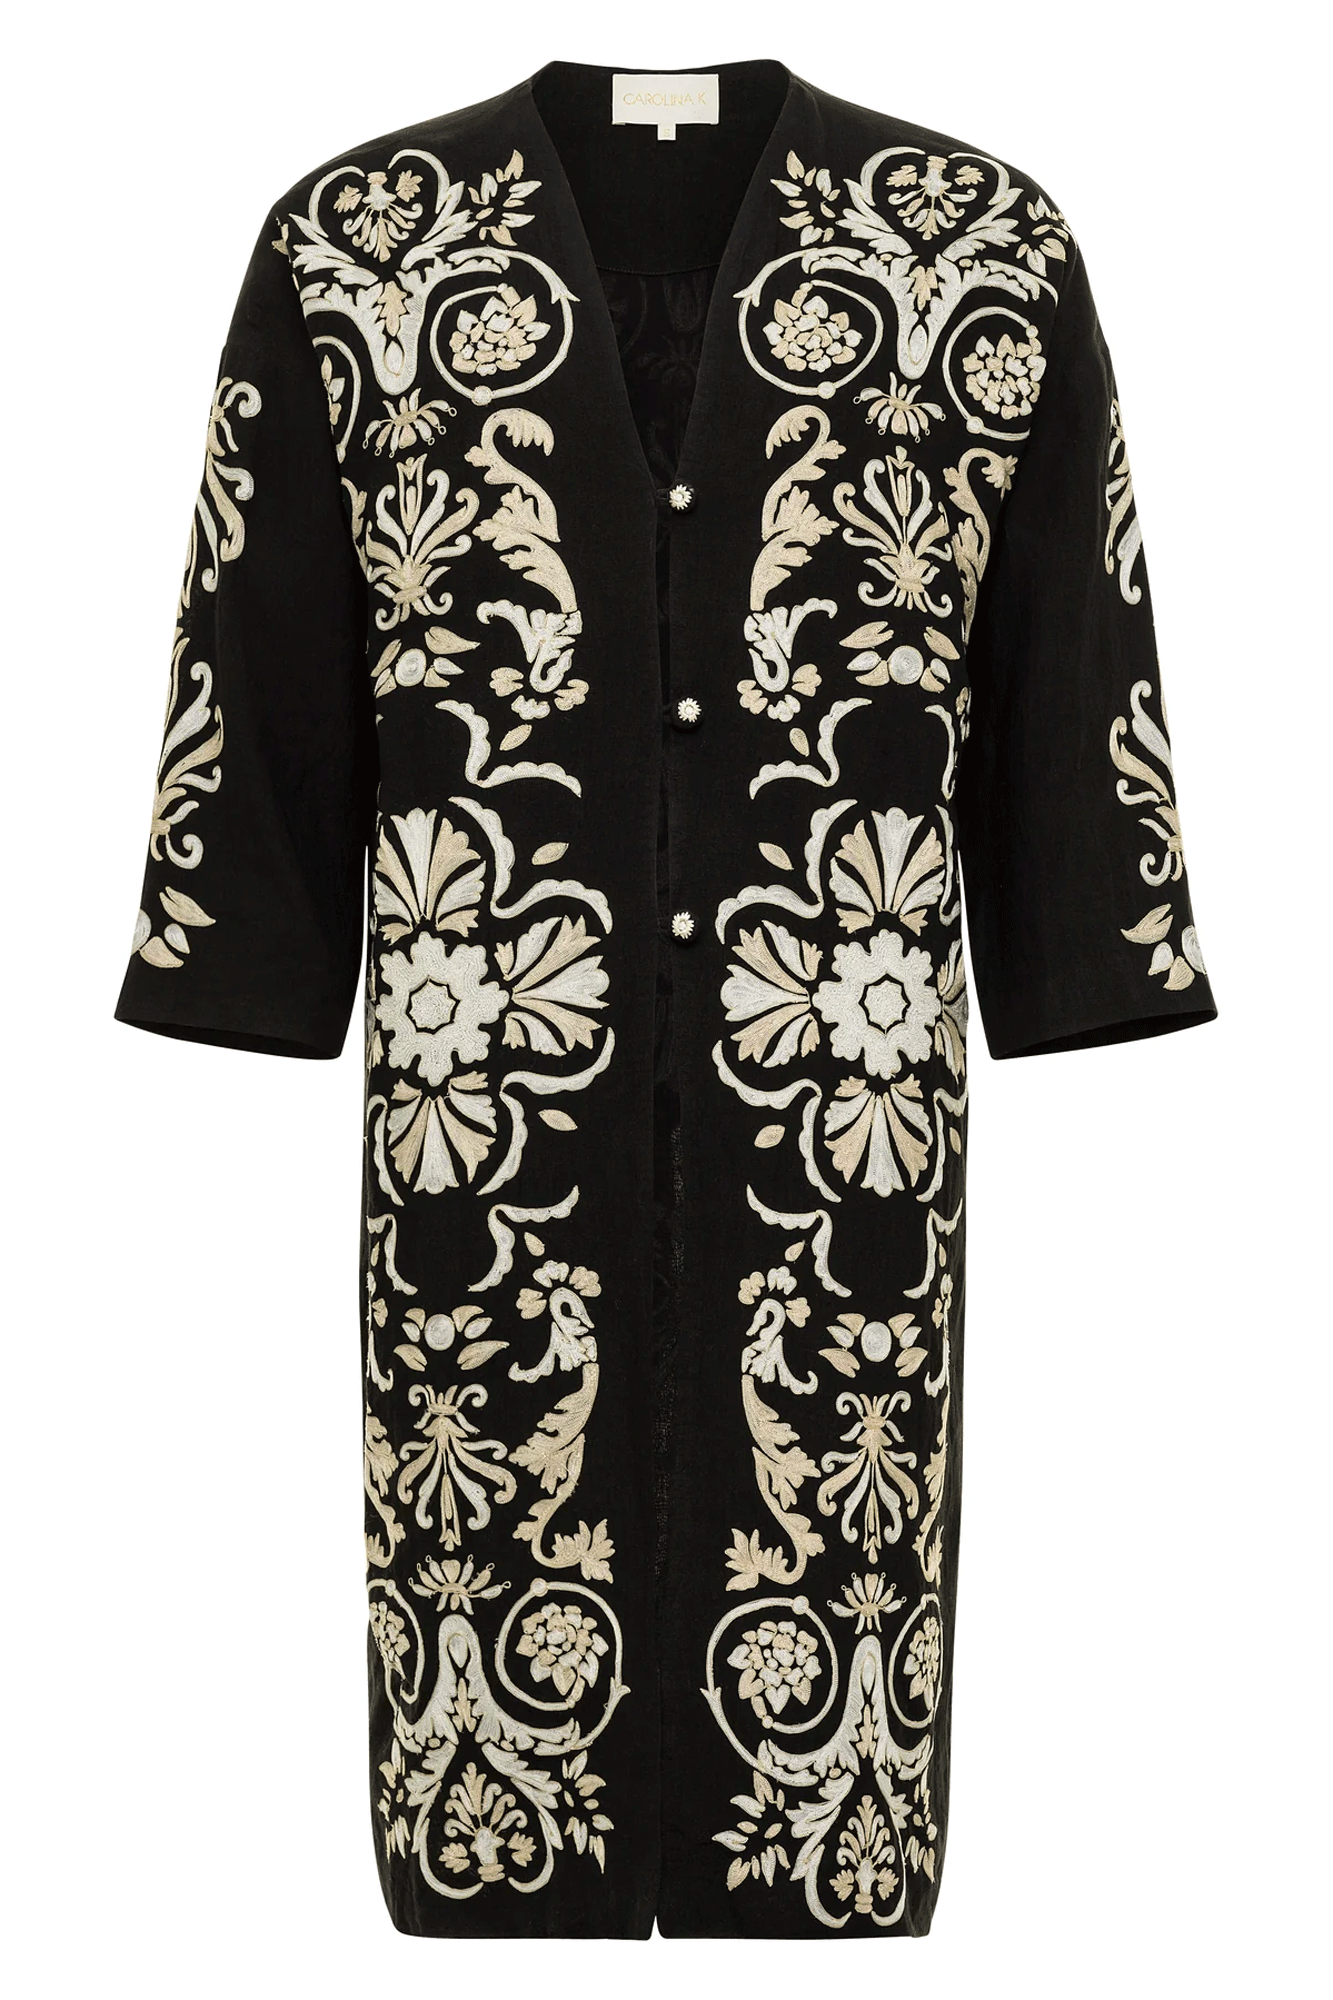 This Eros Embroidery Coat from Carolina K is a stylish and sophisticated piece for your wardrobe. The robe styling, wide sleeves, and oversized bodice provide a comfortable and flattering fit. The finely embroidered details add a unique touch of texture and visual interest. The button closure and full lining provide both warmth and durability.